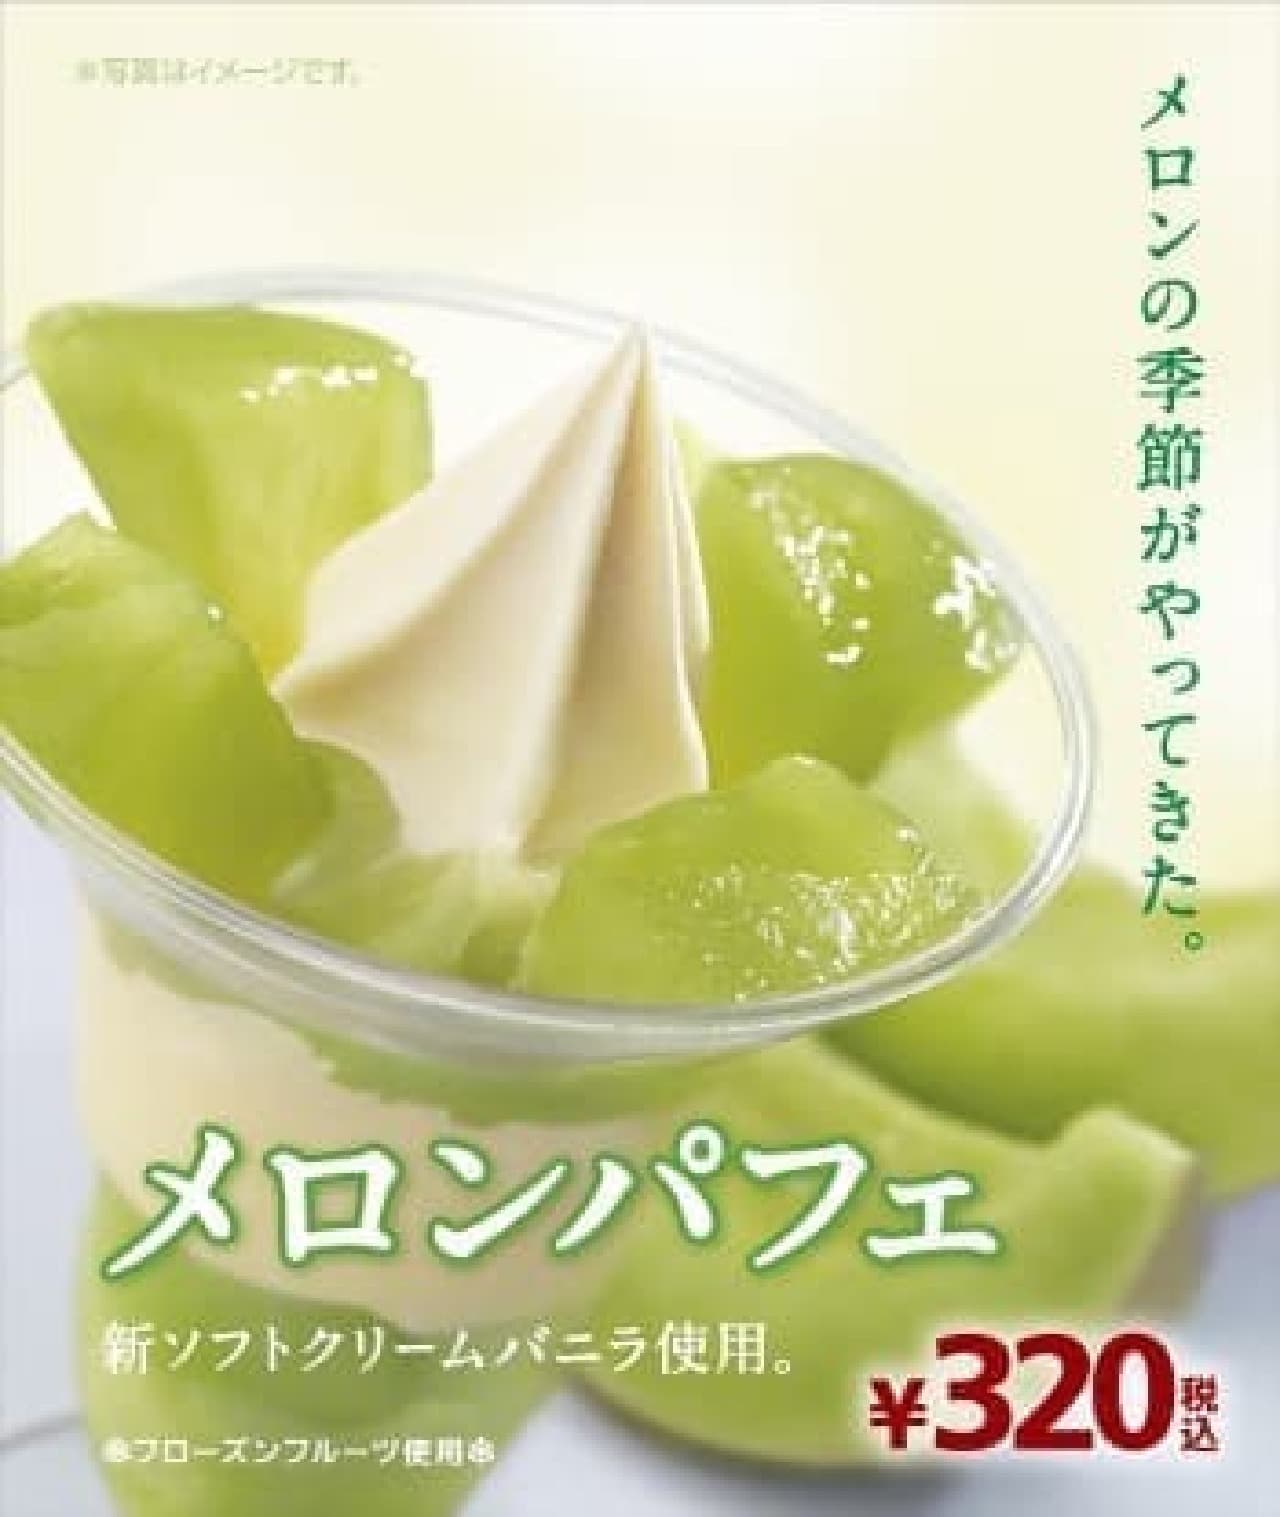 Introducing a parfait that uses melon luxuriously!